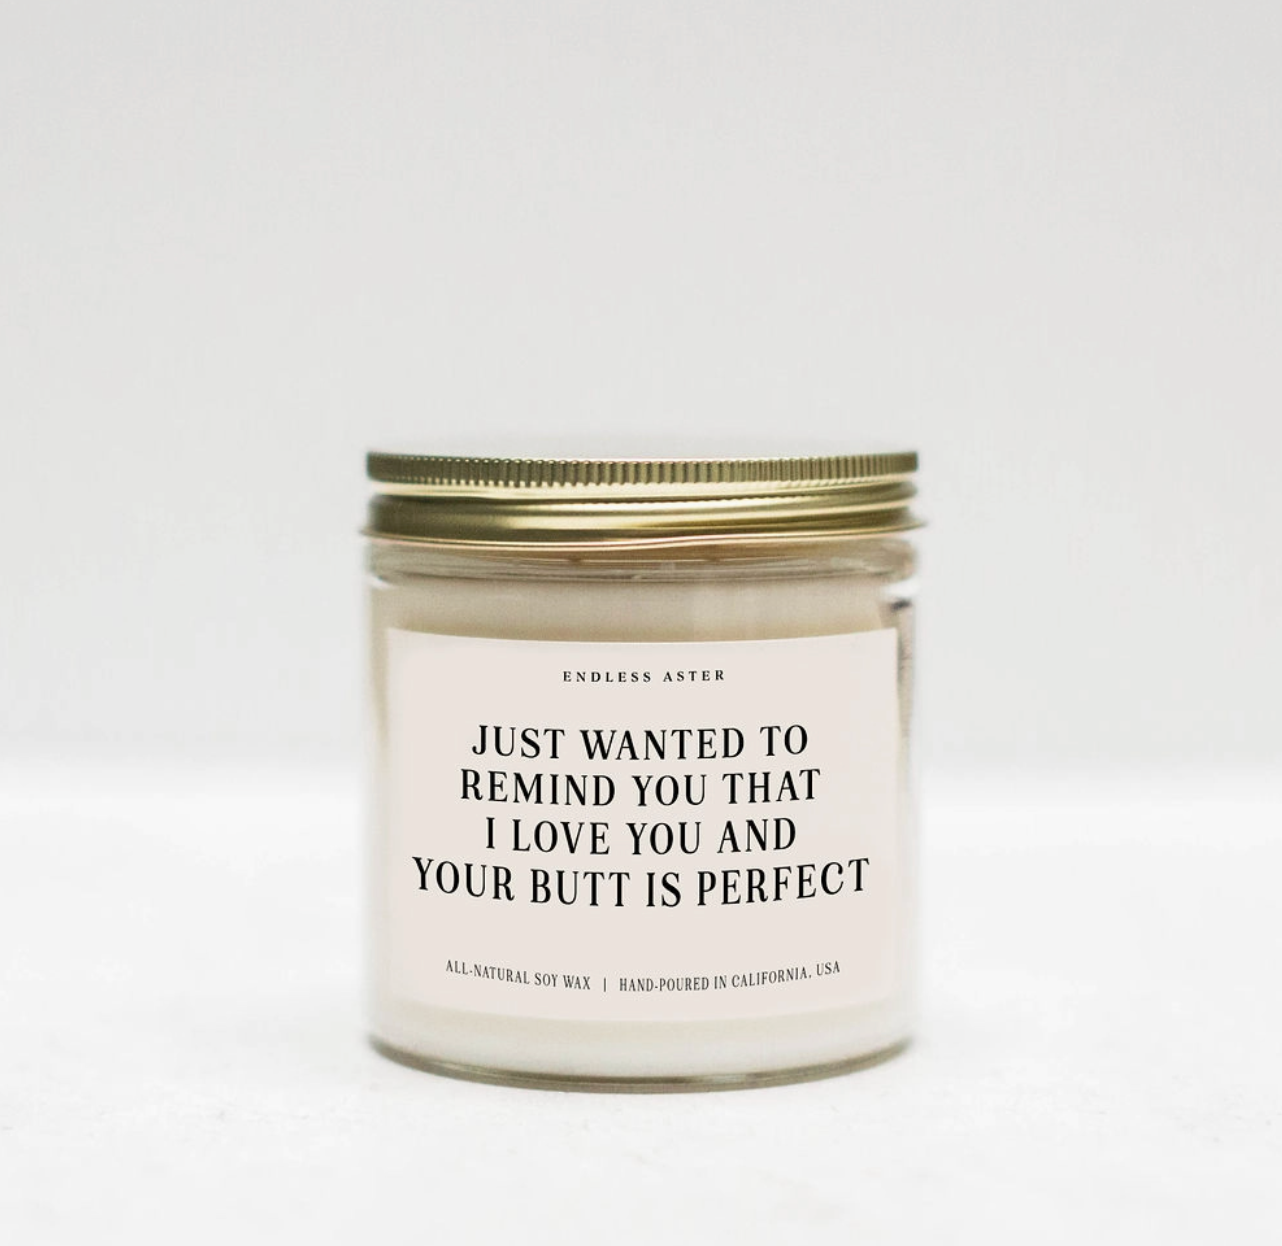 I Love You and Your Butt is Perfect Candle